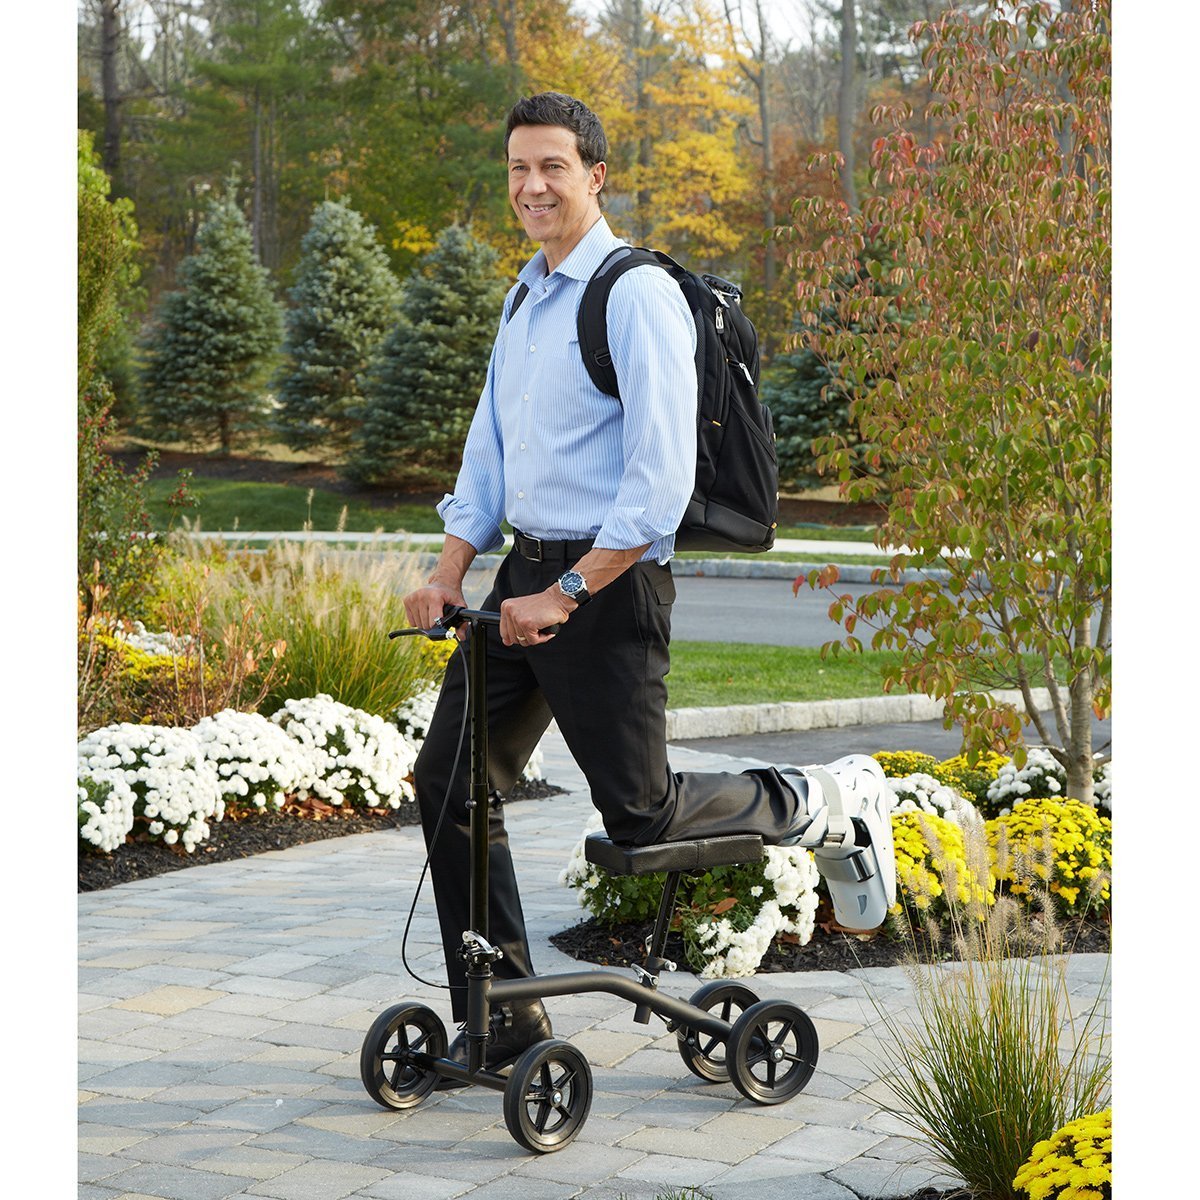 A man in a park on a knee scooter